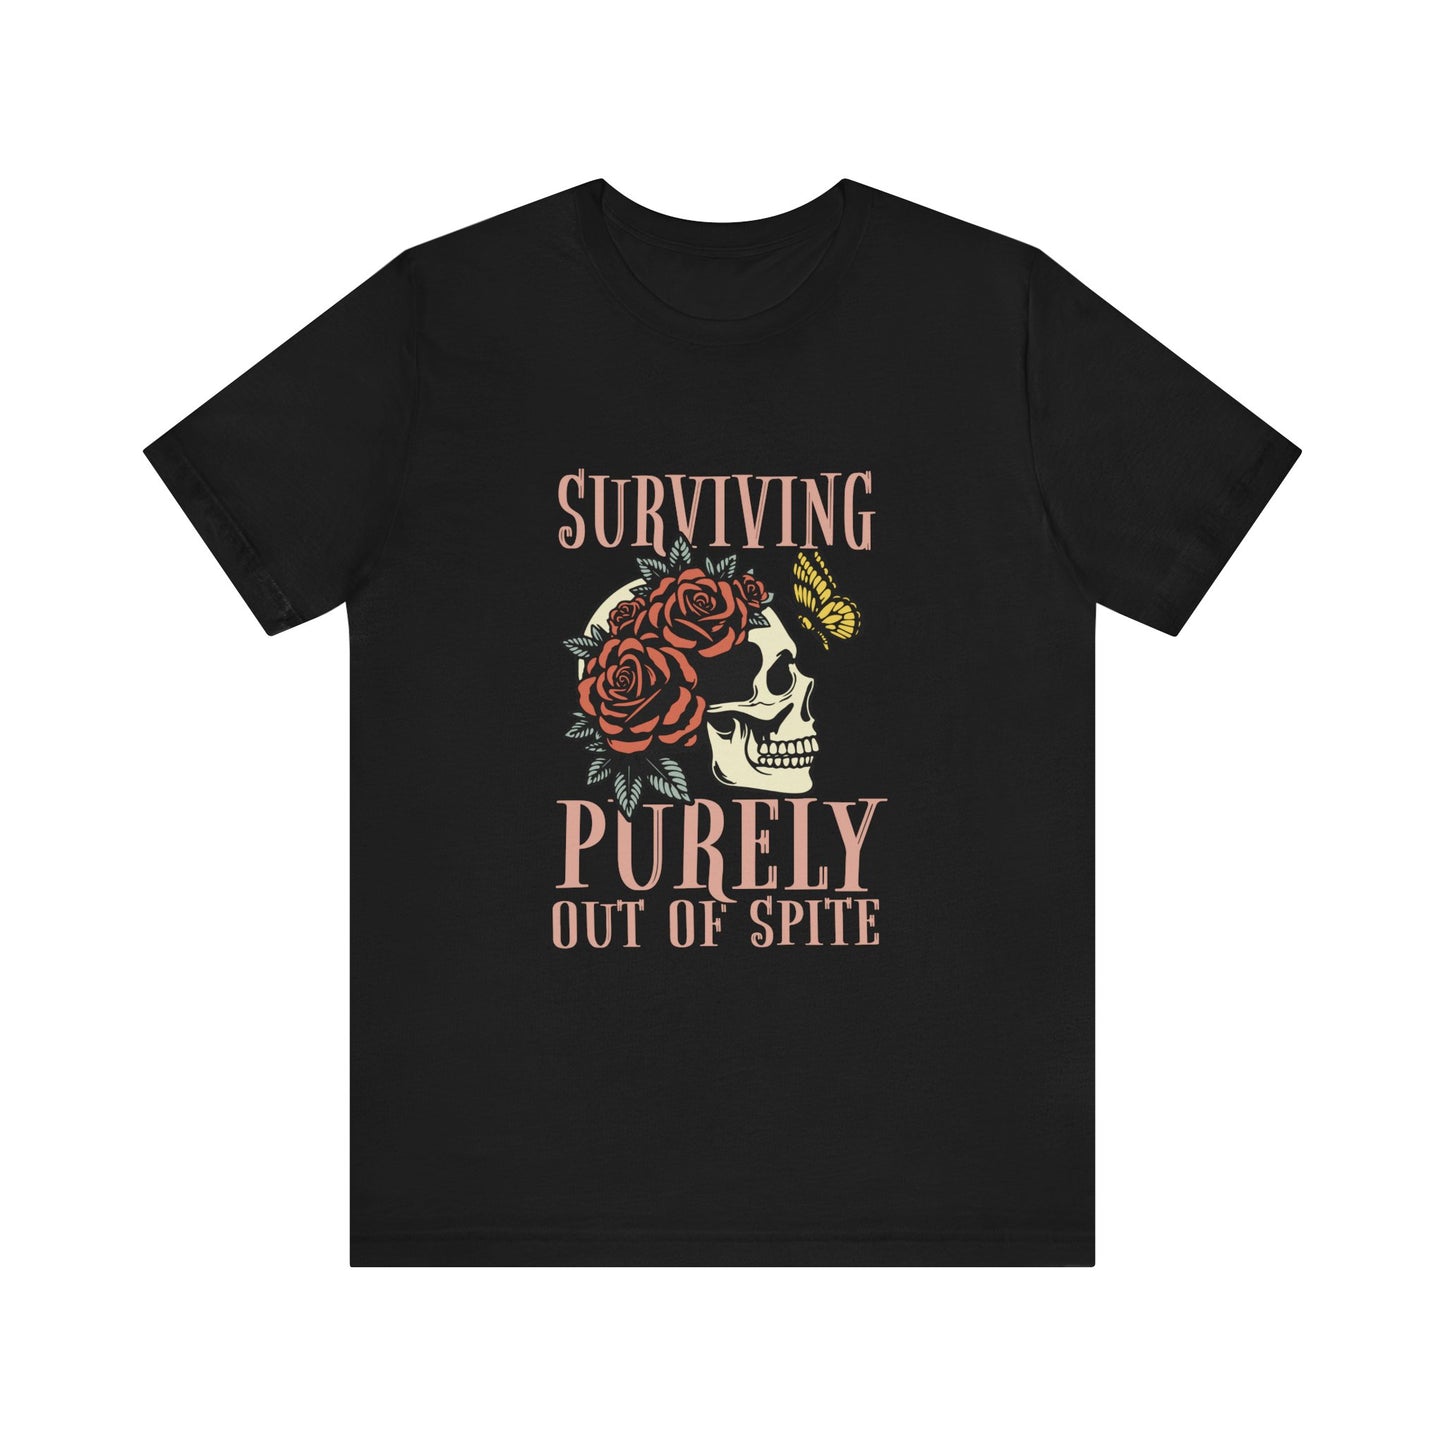 Surviving Purely Out of Spite Funny Women's Short Sleeve Tee